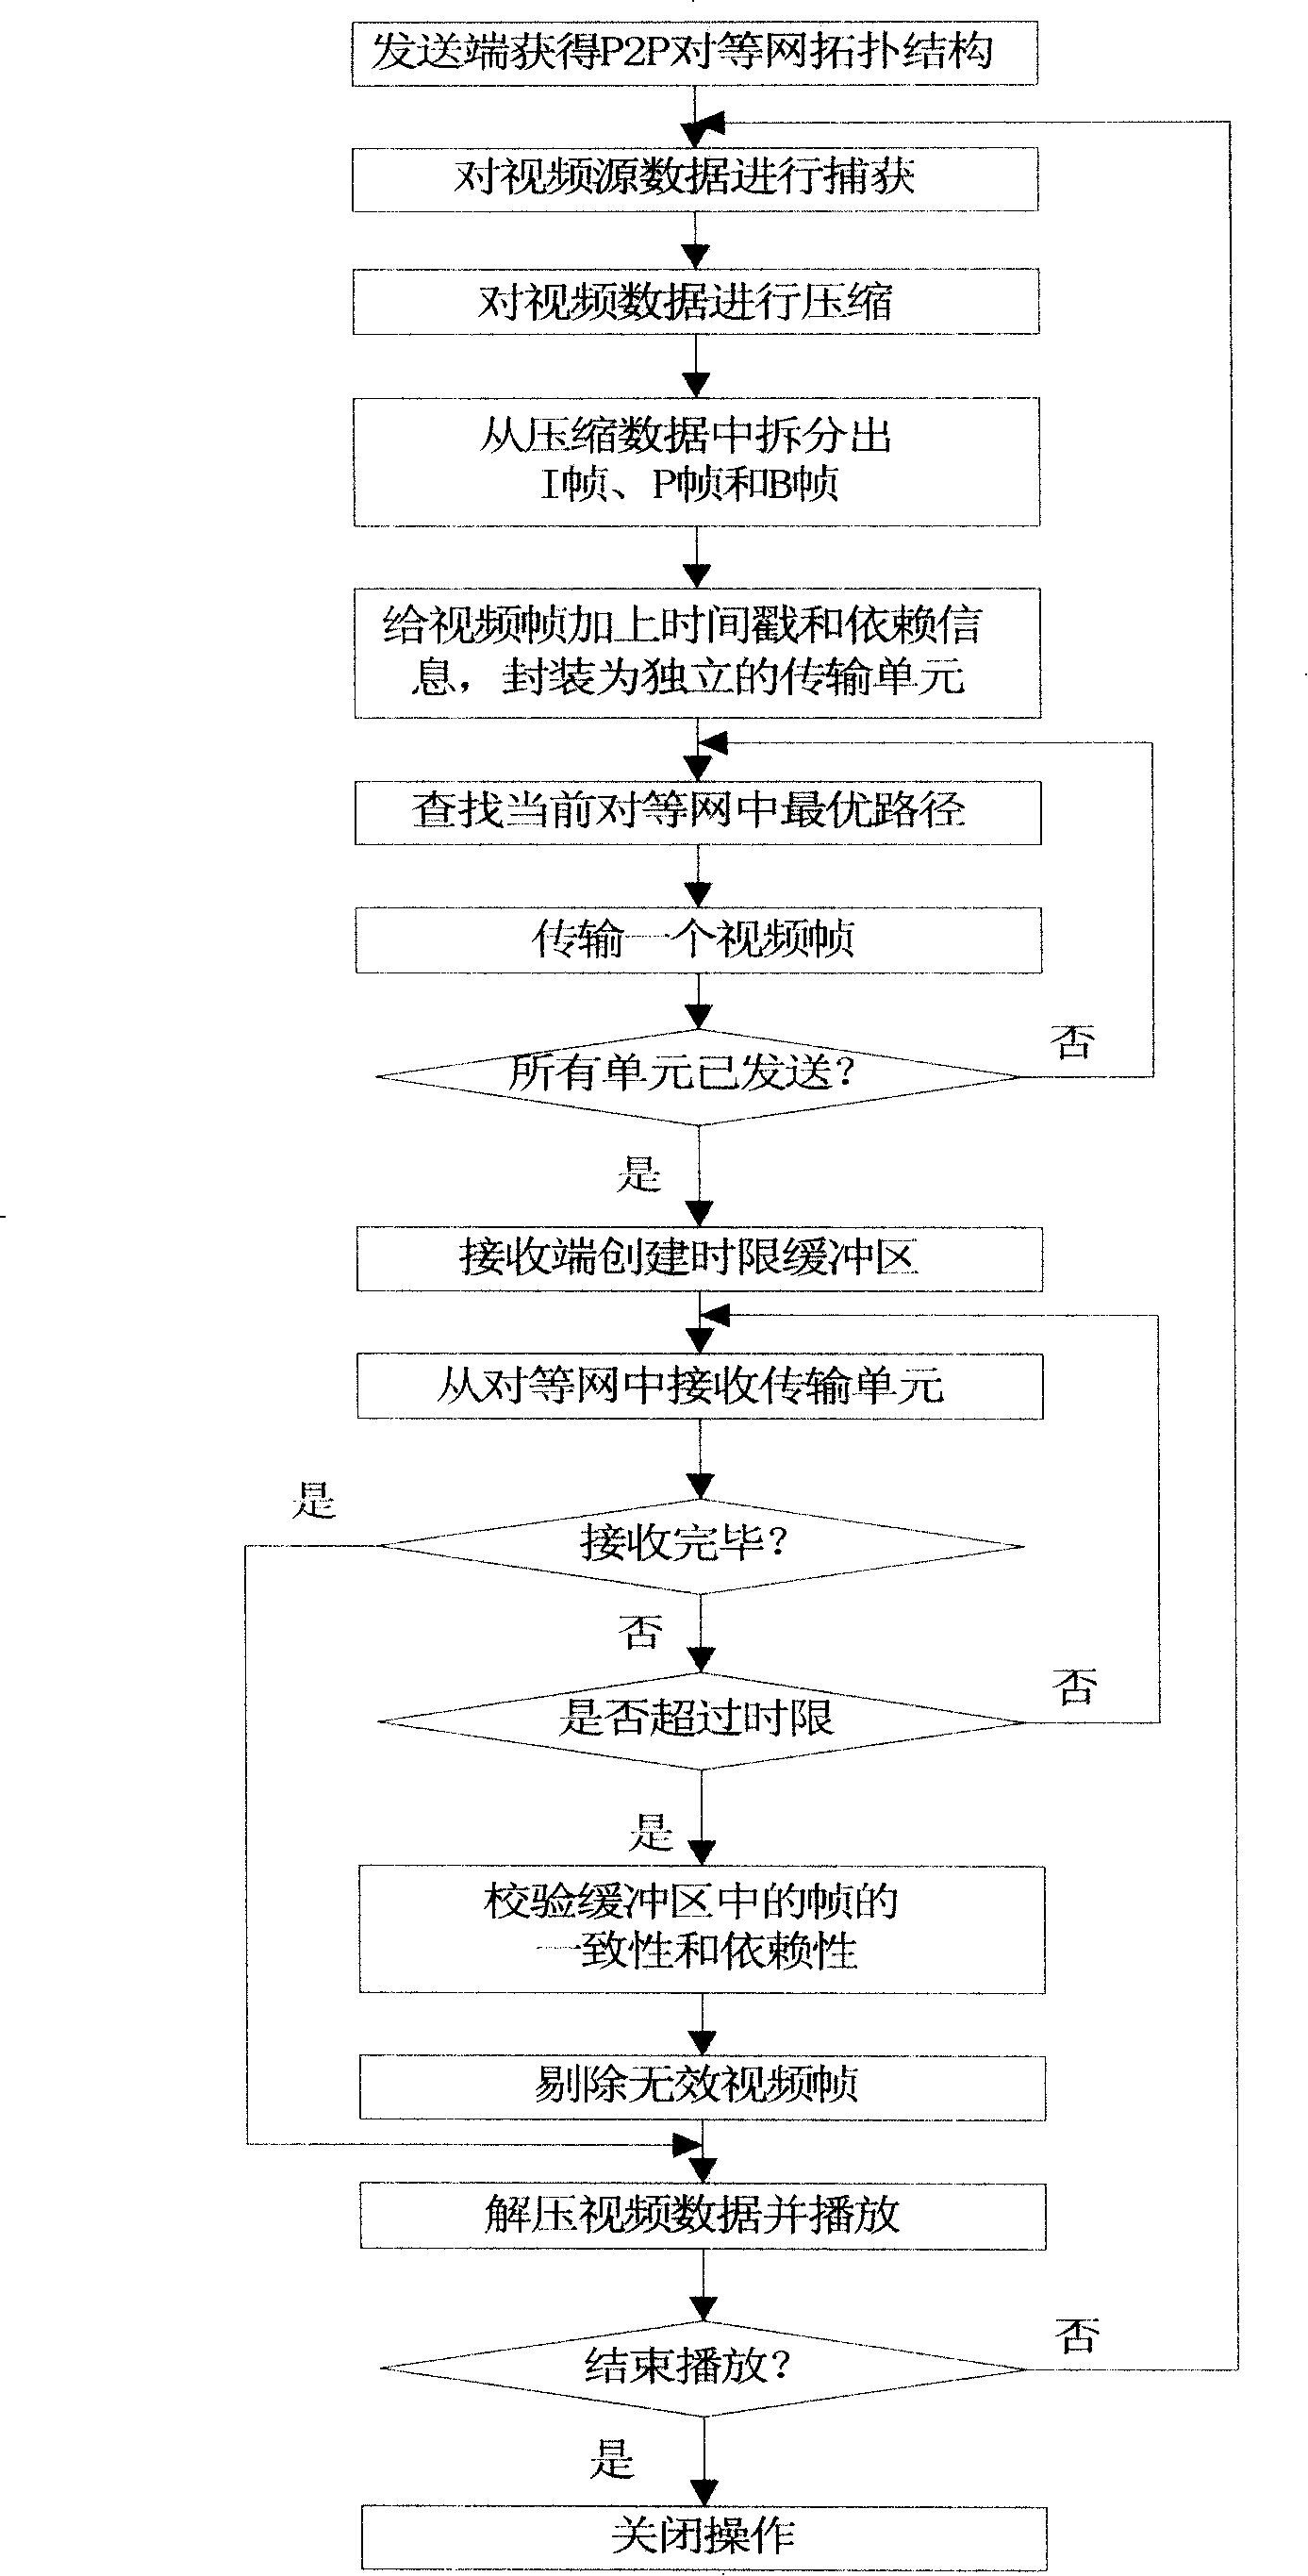 Method and system for transmitting real time flow media based on video frequency frame splitting